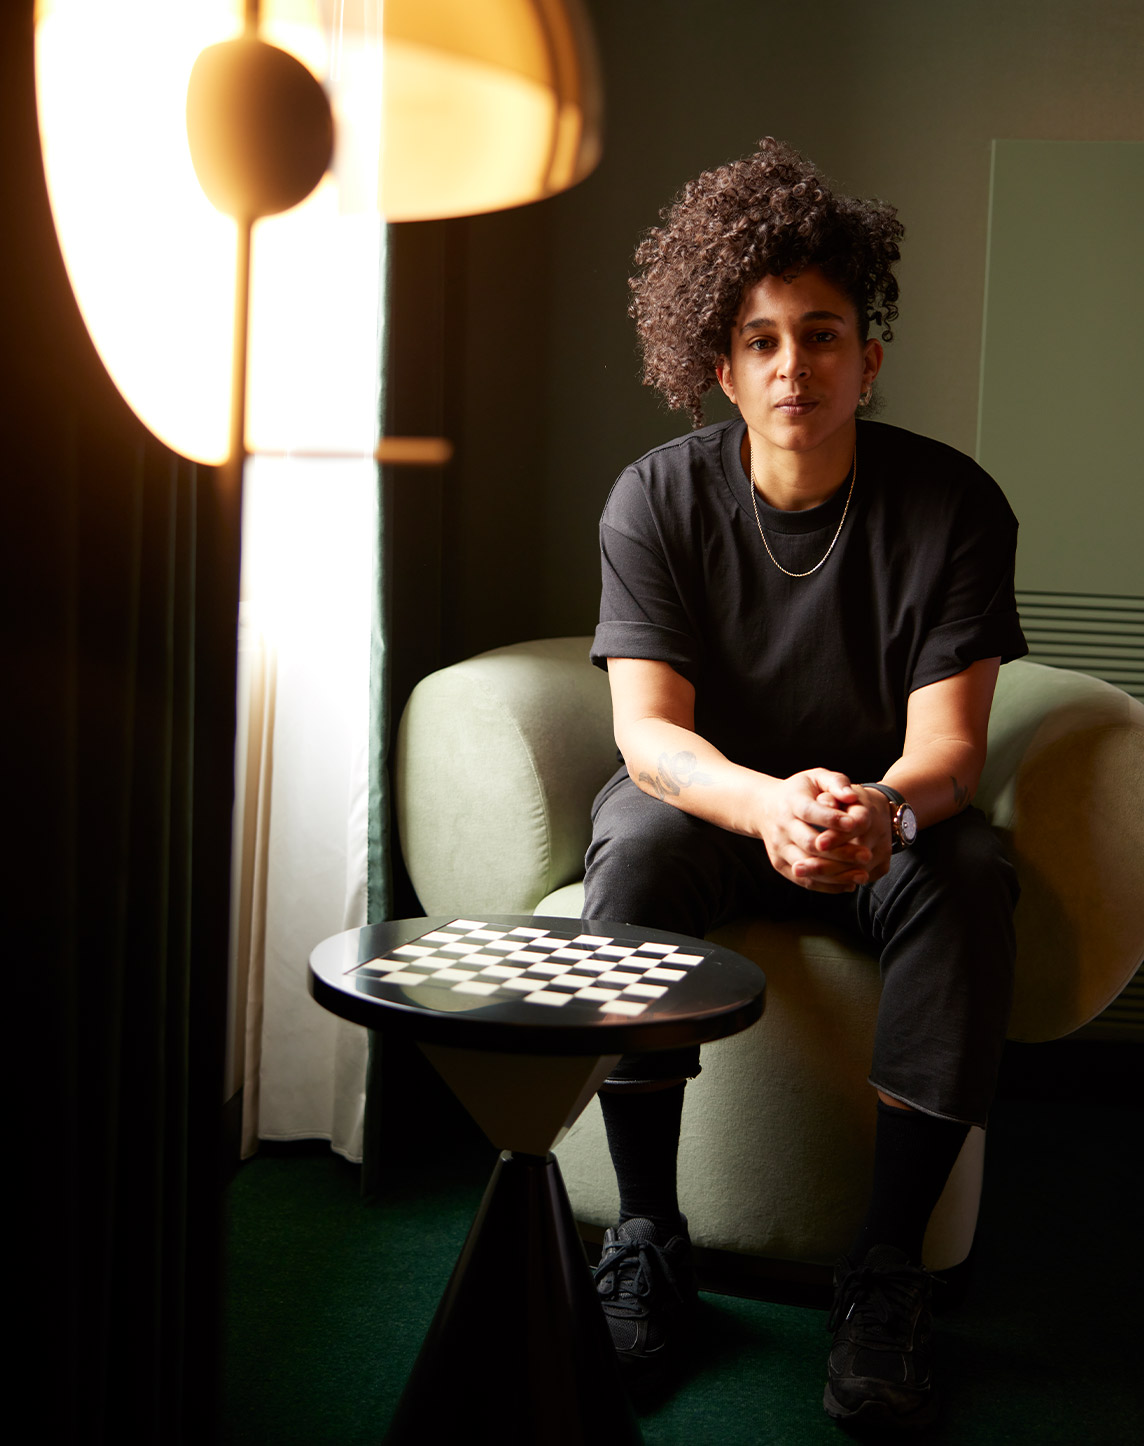 A person with curly hair sits thoughtfully on a green armchair, next to a small table with a checkered board, illuminated by soft light from a floor lamp.